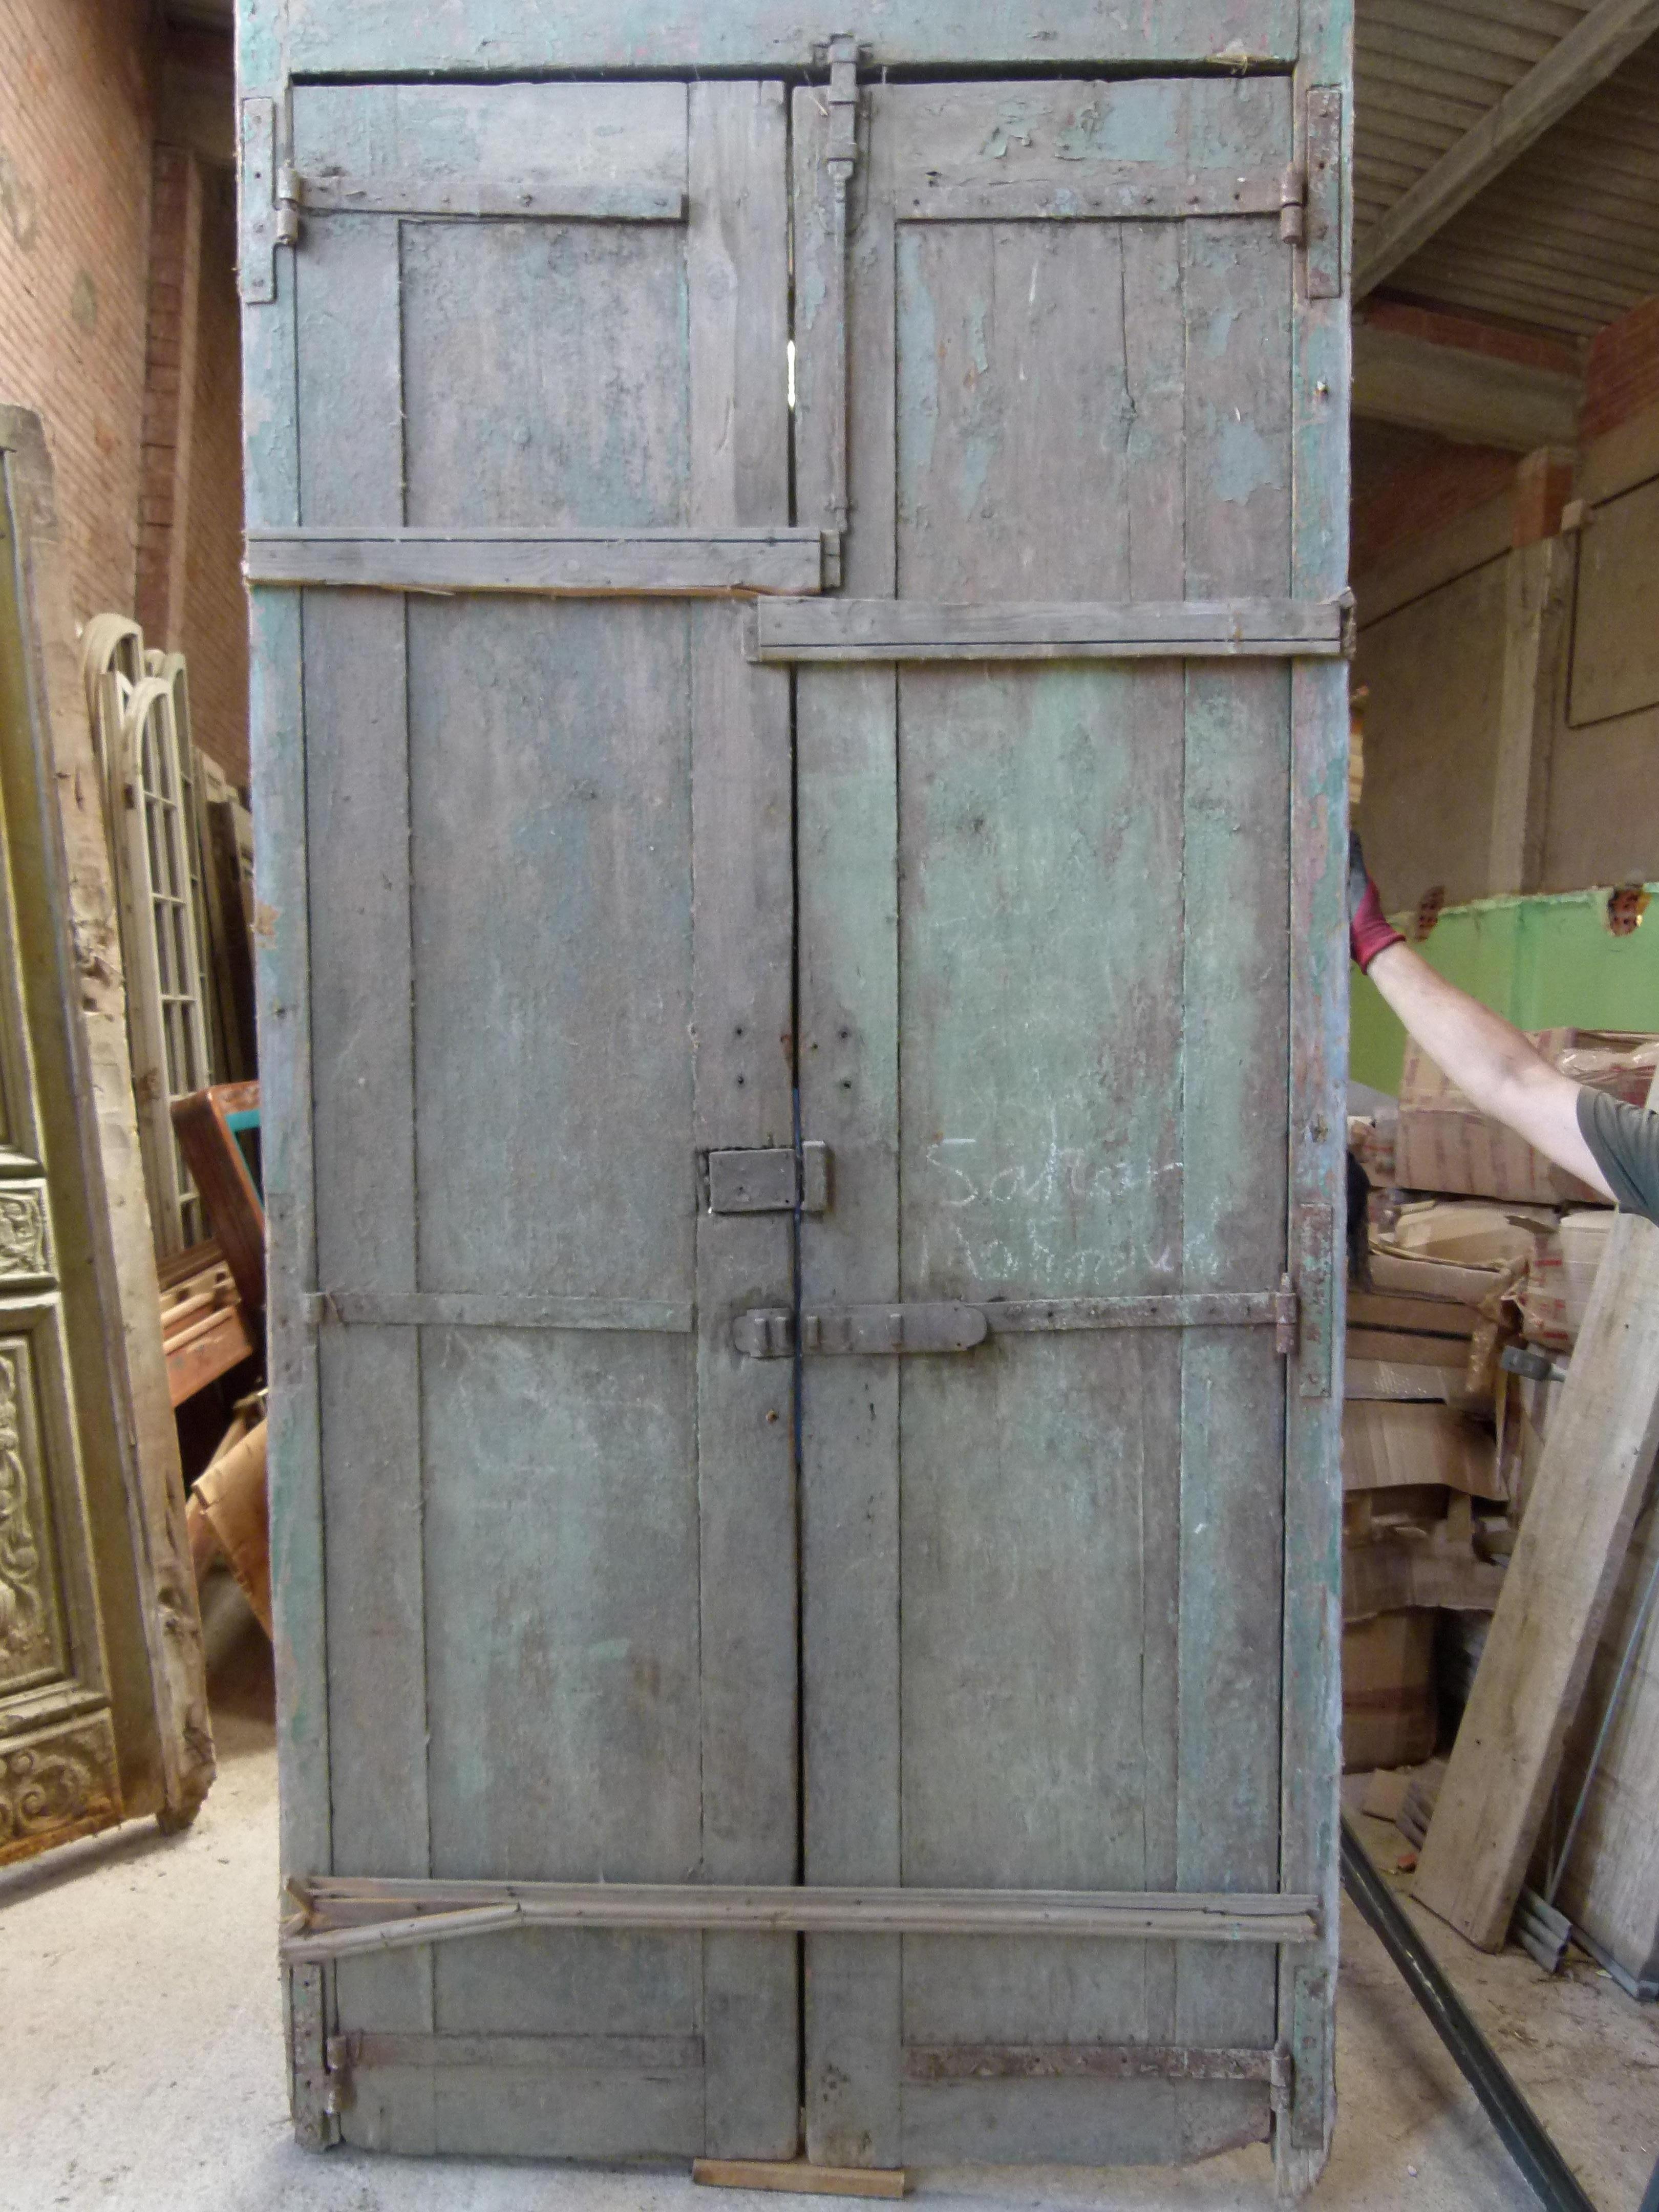 19th century double wooden front door with patina in Art Nouveau style from Catalonien, Spain.
Carved wood typical from this period.
The door is framed and working but needs some restoration as some parts are damaged.
The original patina of the